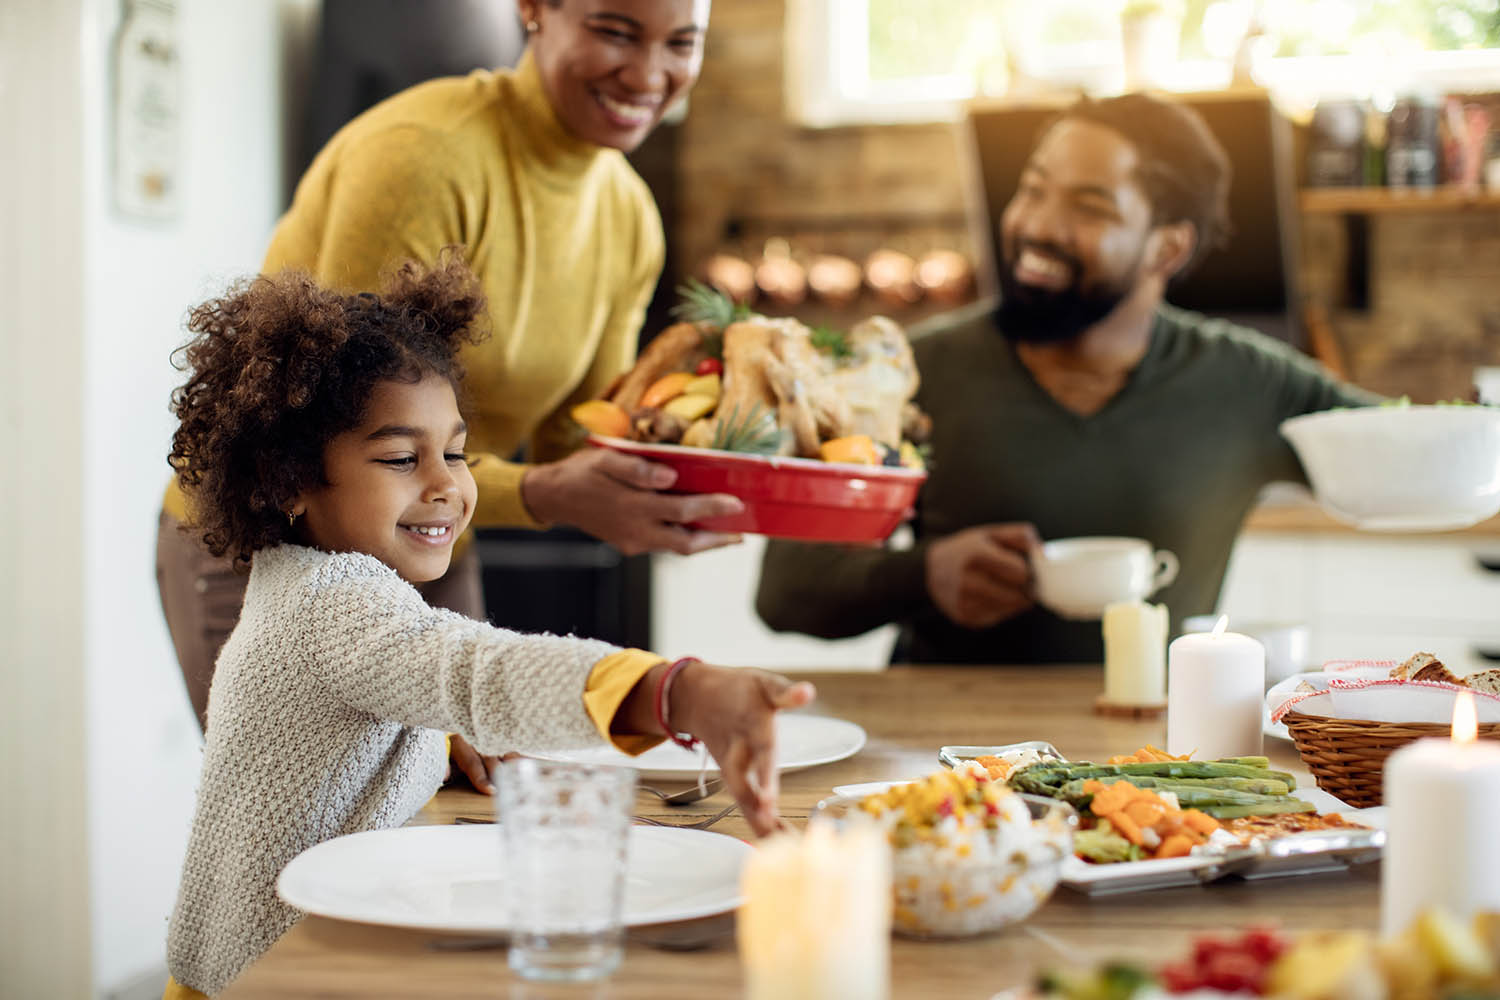 Flu Season and Thanksgiving Gatherings: How to Keep Your Family Safe